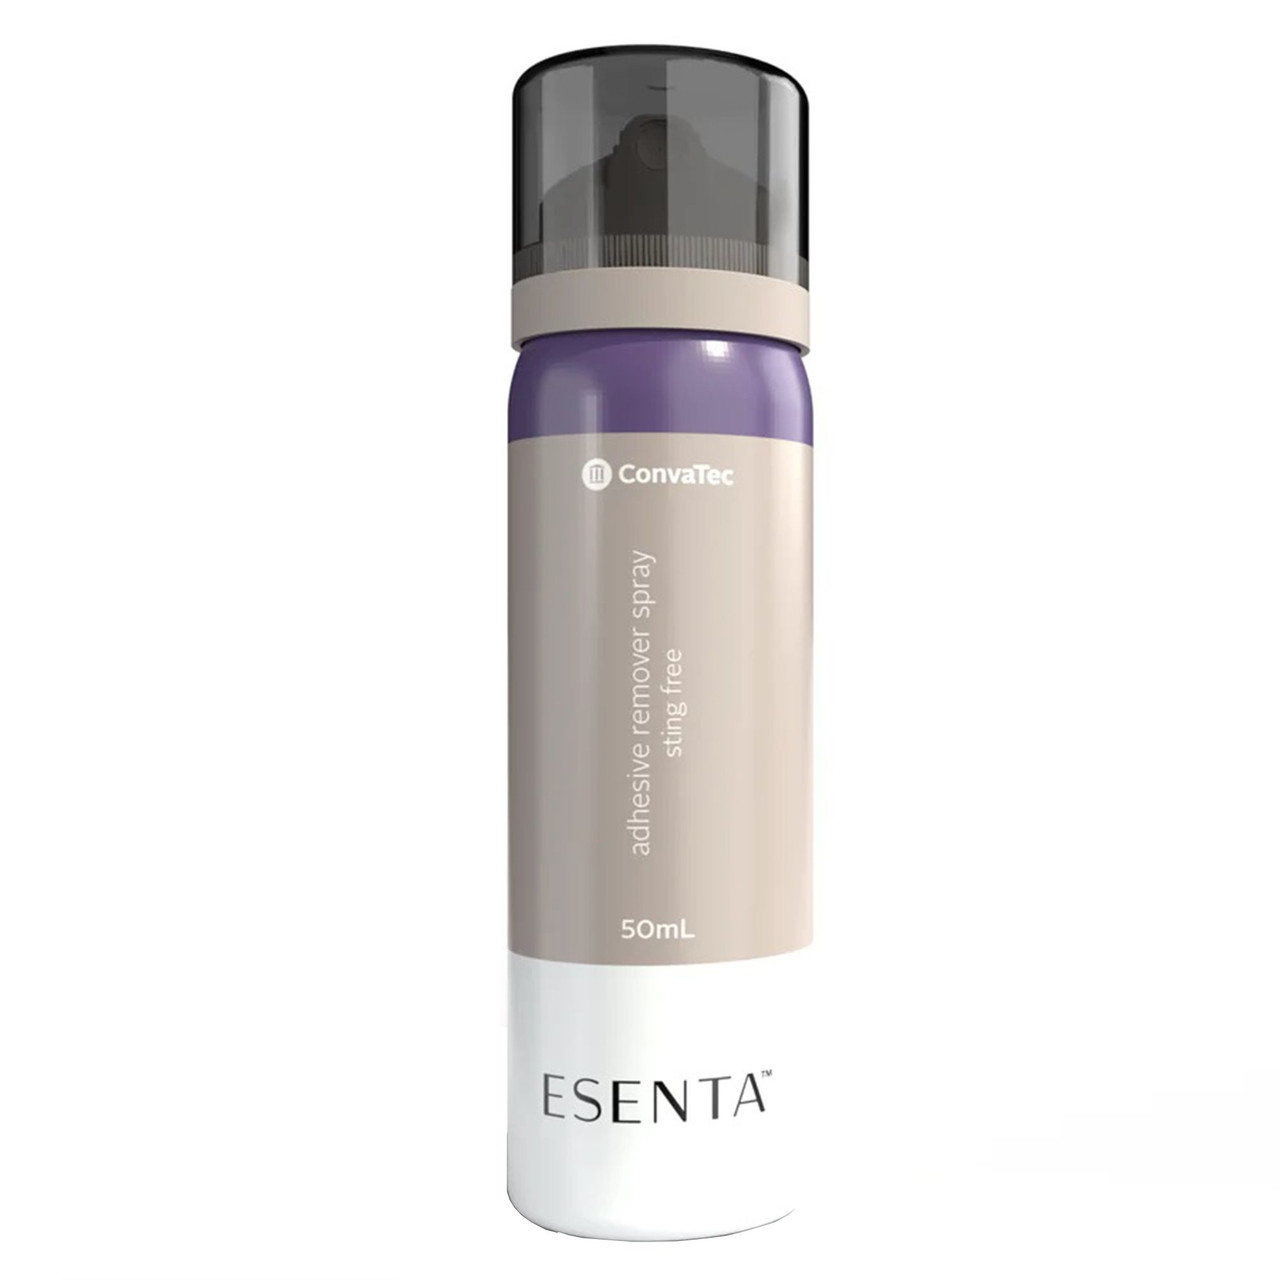 ESENTA™, silicone-based skin protection & adhesive removal